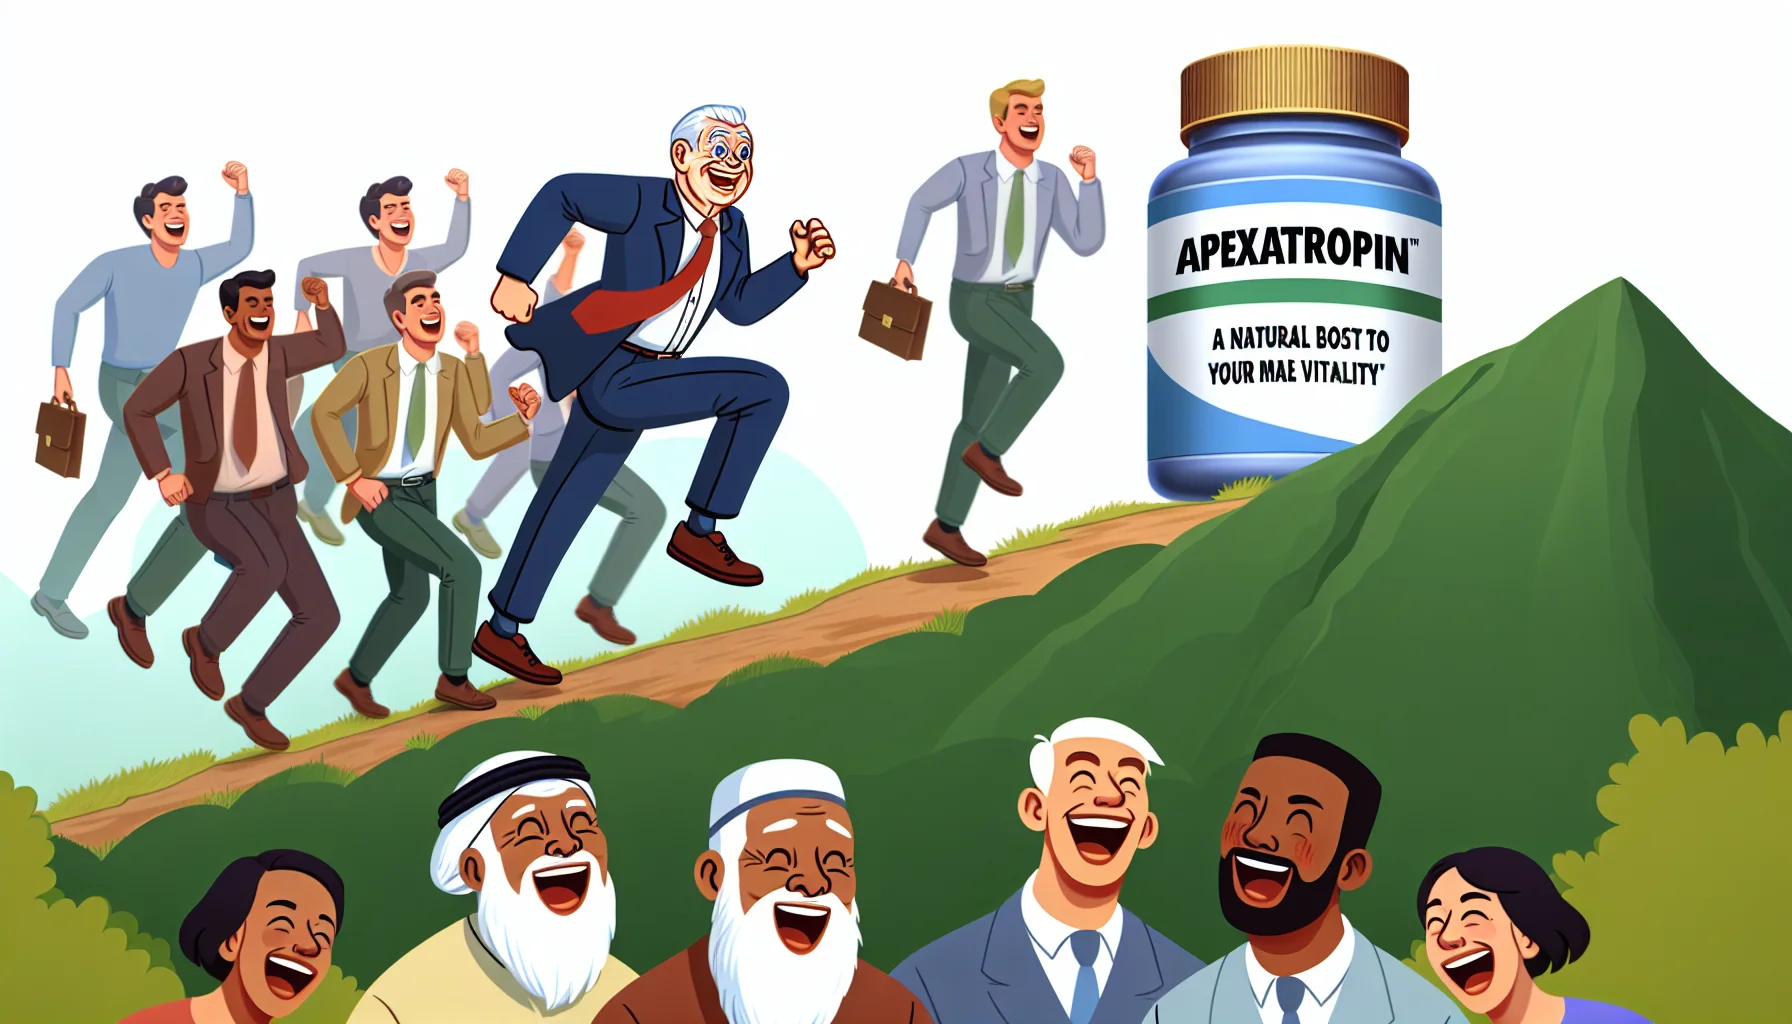 Illustrate a humorous scene where a product labelled 'Apexatropin: A Natural Boost to Your Male Vitality' is placed at the top of a hill. Nearby, an older, Caucasian gentleman is enthusiastically running up the hill, looking determined yet playful. In the foreground, a group of laughing spectators from different descents like Hispanic, Middle-Eastern, and South Asian are watching and cheering on. Create an environment that metaphorically suggests the effort of regular exercise while also maintaining a light and enticing tone.